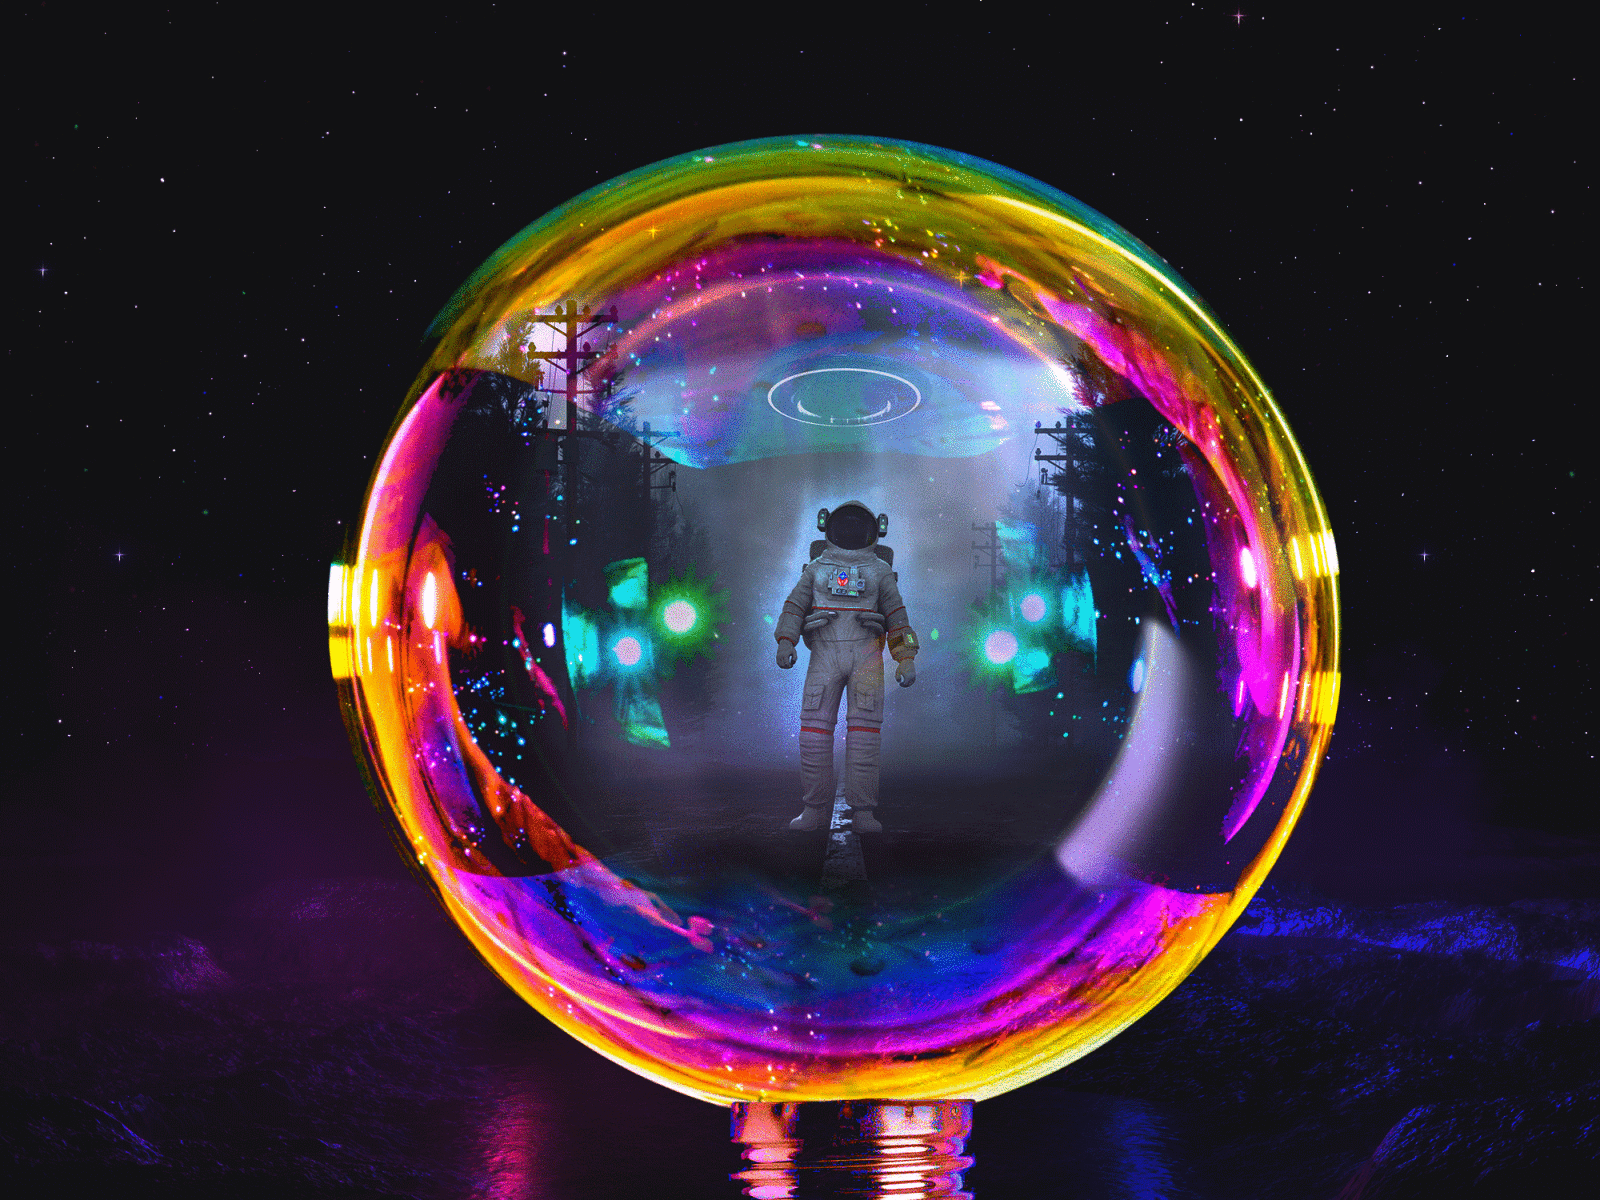 Landed in a new bubble abstract bubble design graphic design illusions inspiration space vibrant vibrant colors